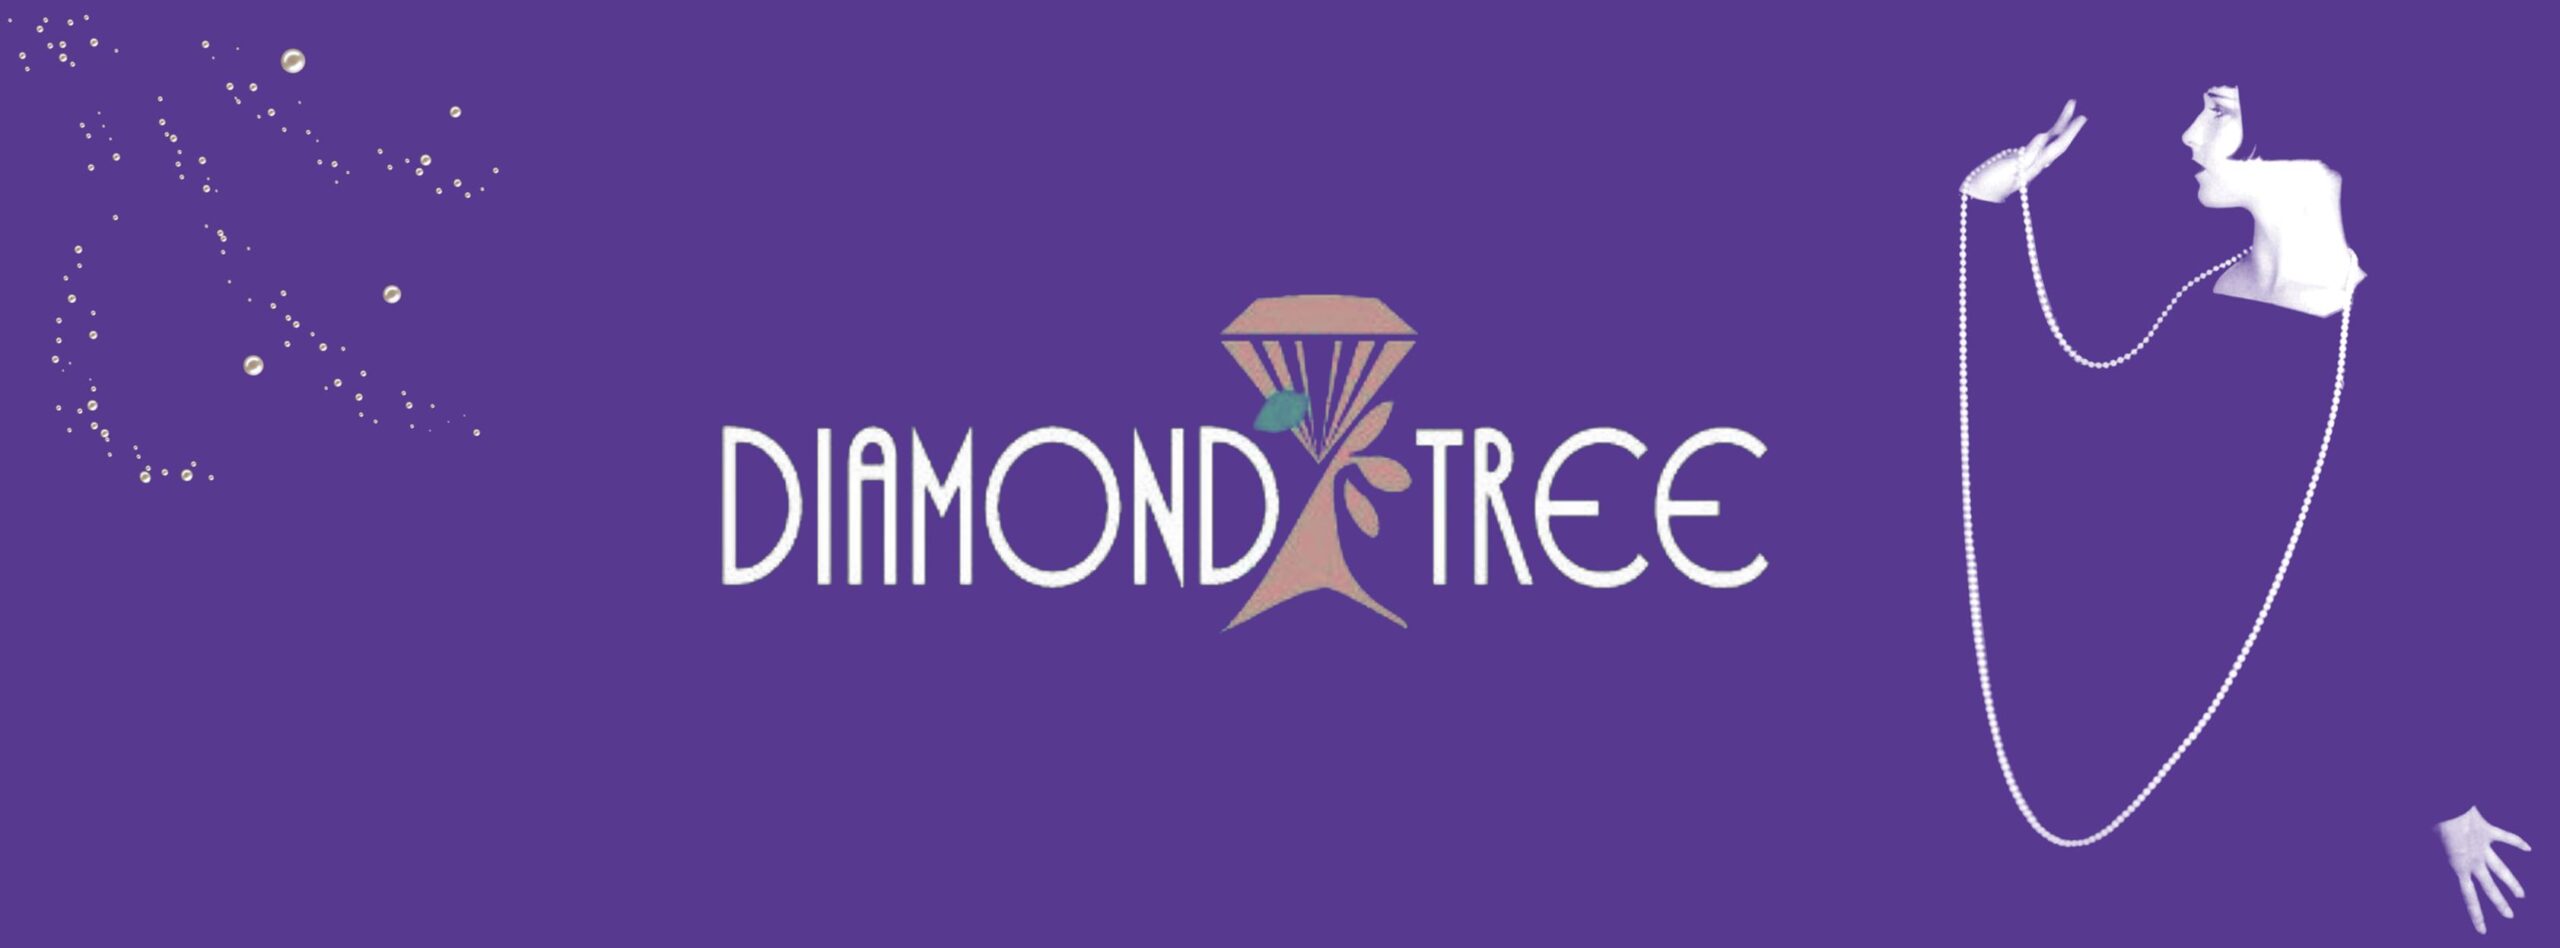 Diamondtree Jewels – History, Growth, Products, Stores, Popularity Among Customers